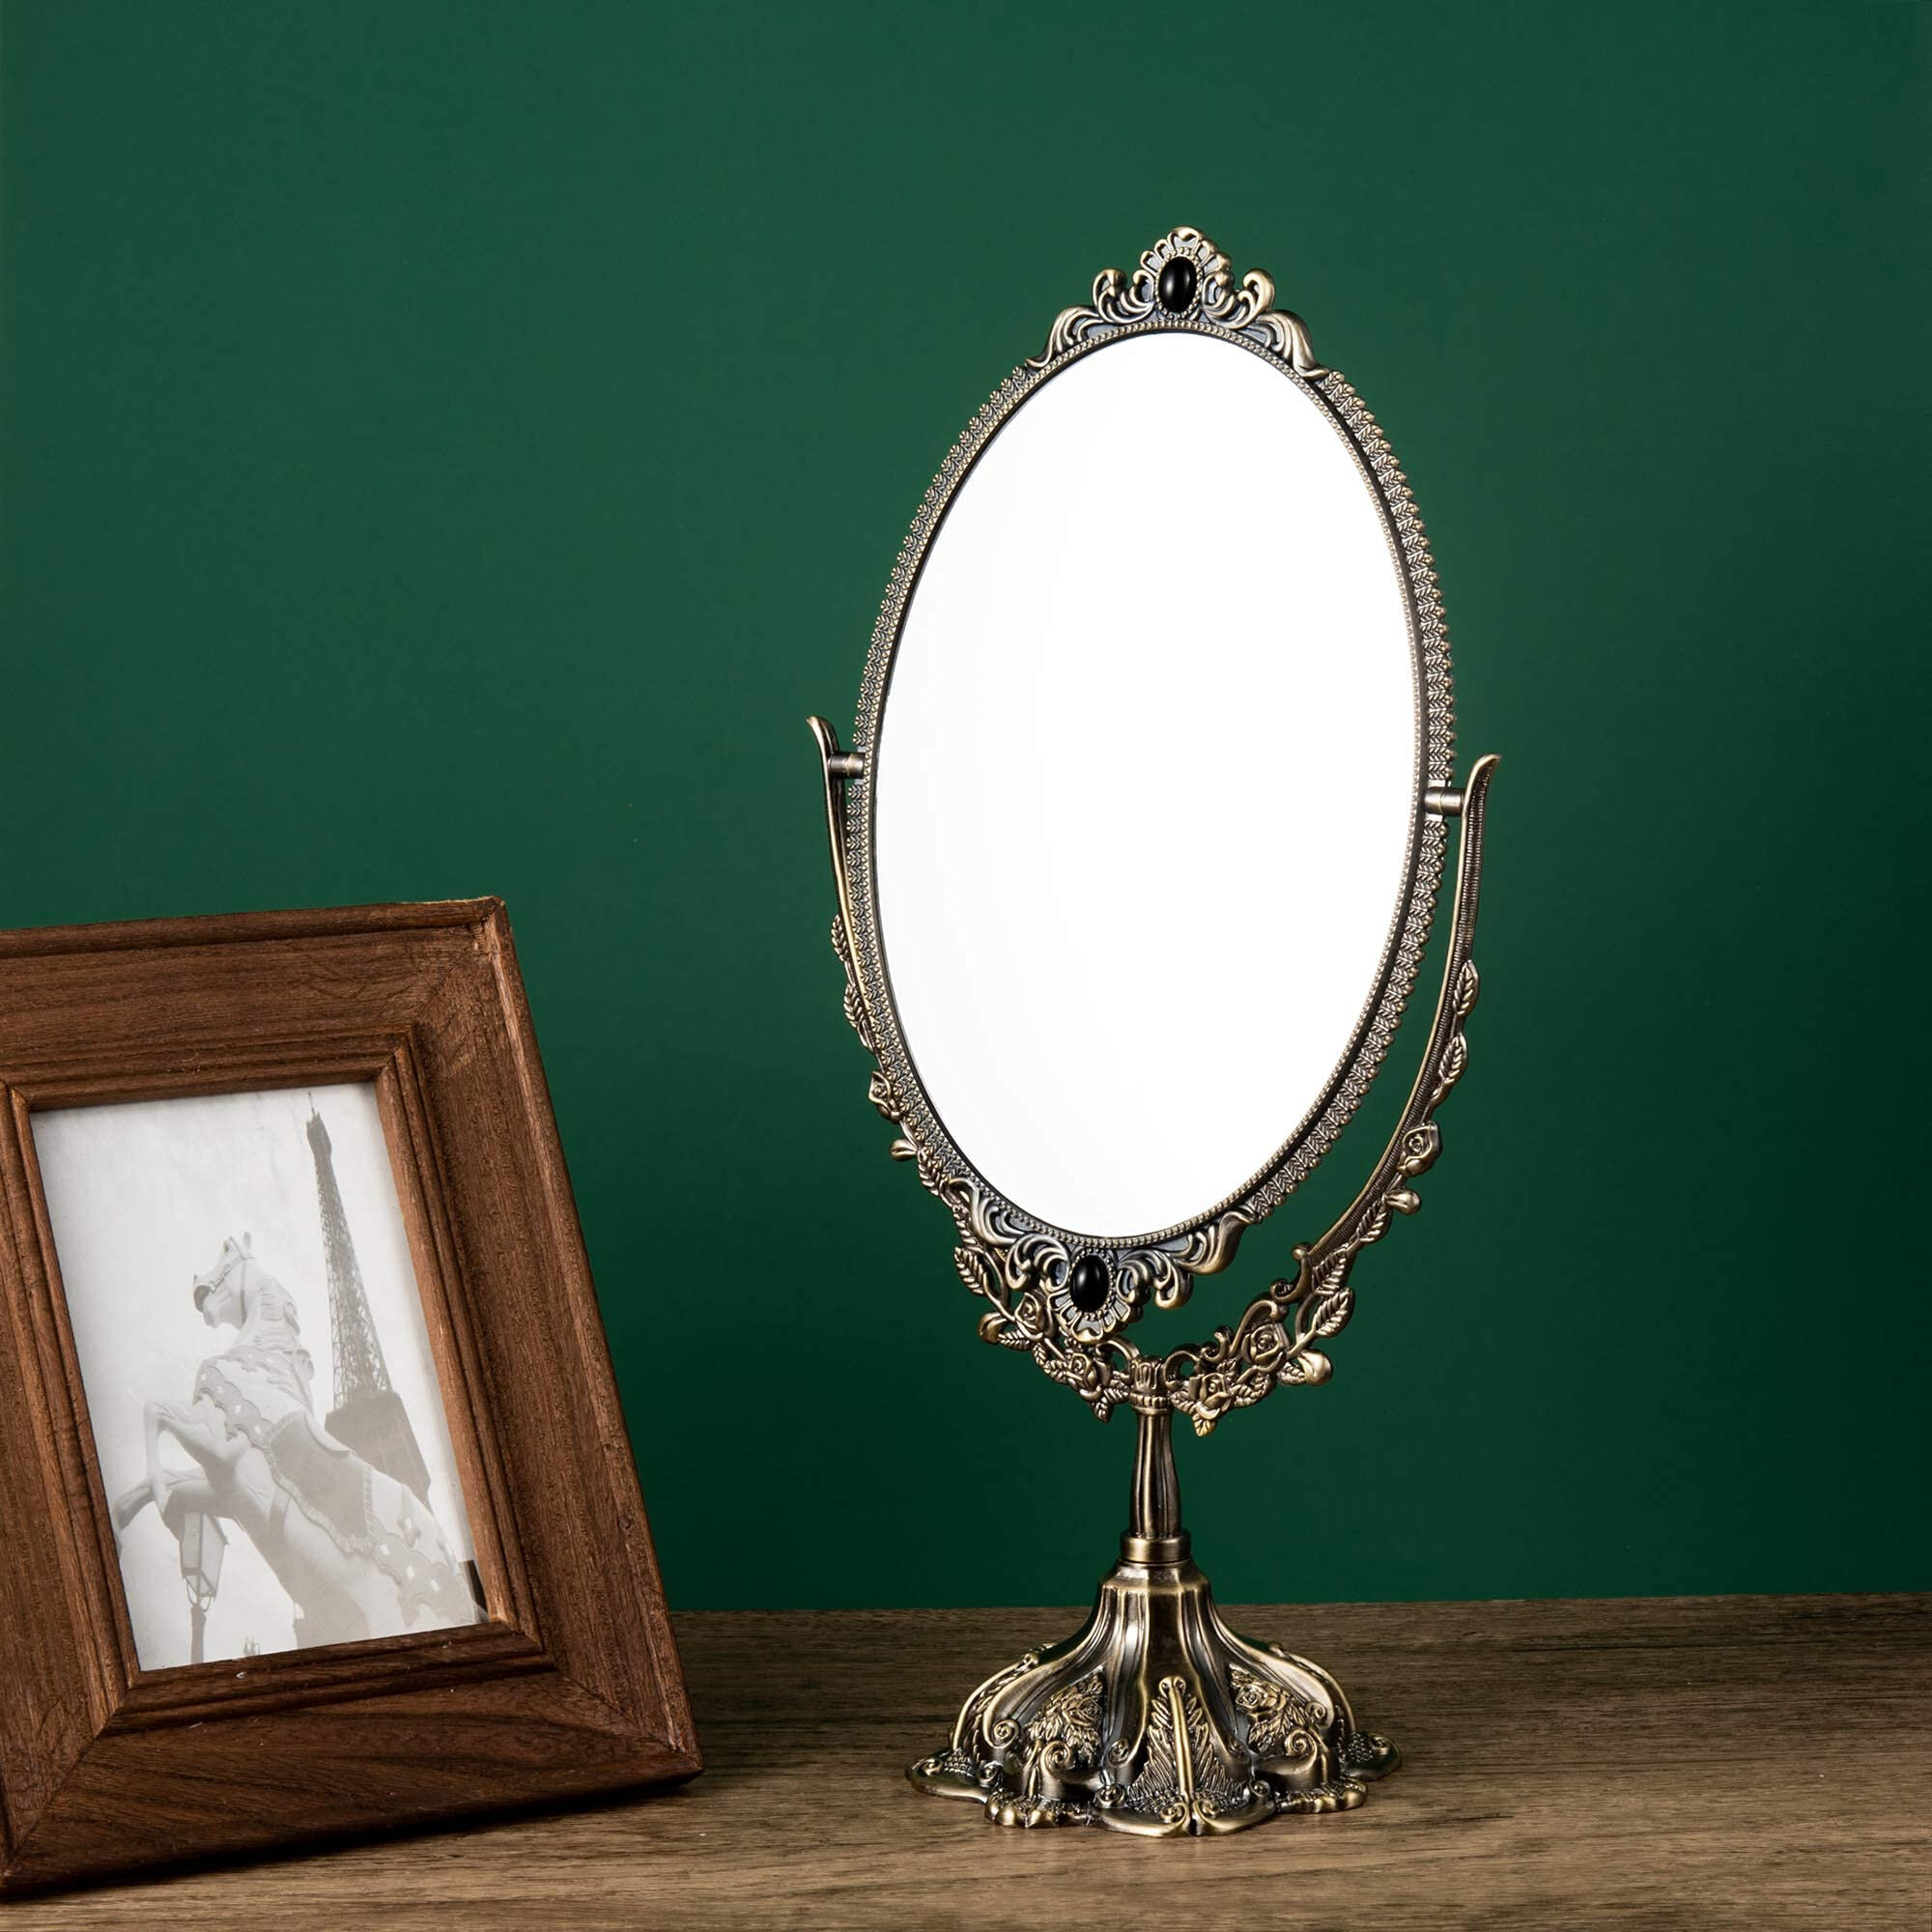 Bloomsbury Market 14 7inch Vintage Makeup Mirror Tabletop Oval Vanity Mirror With Base Double Sided Swivel Decorative Elegent Mirror For Counter Display Birthday Gift Wayfair